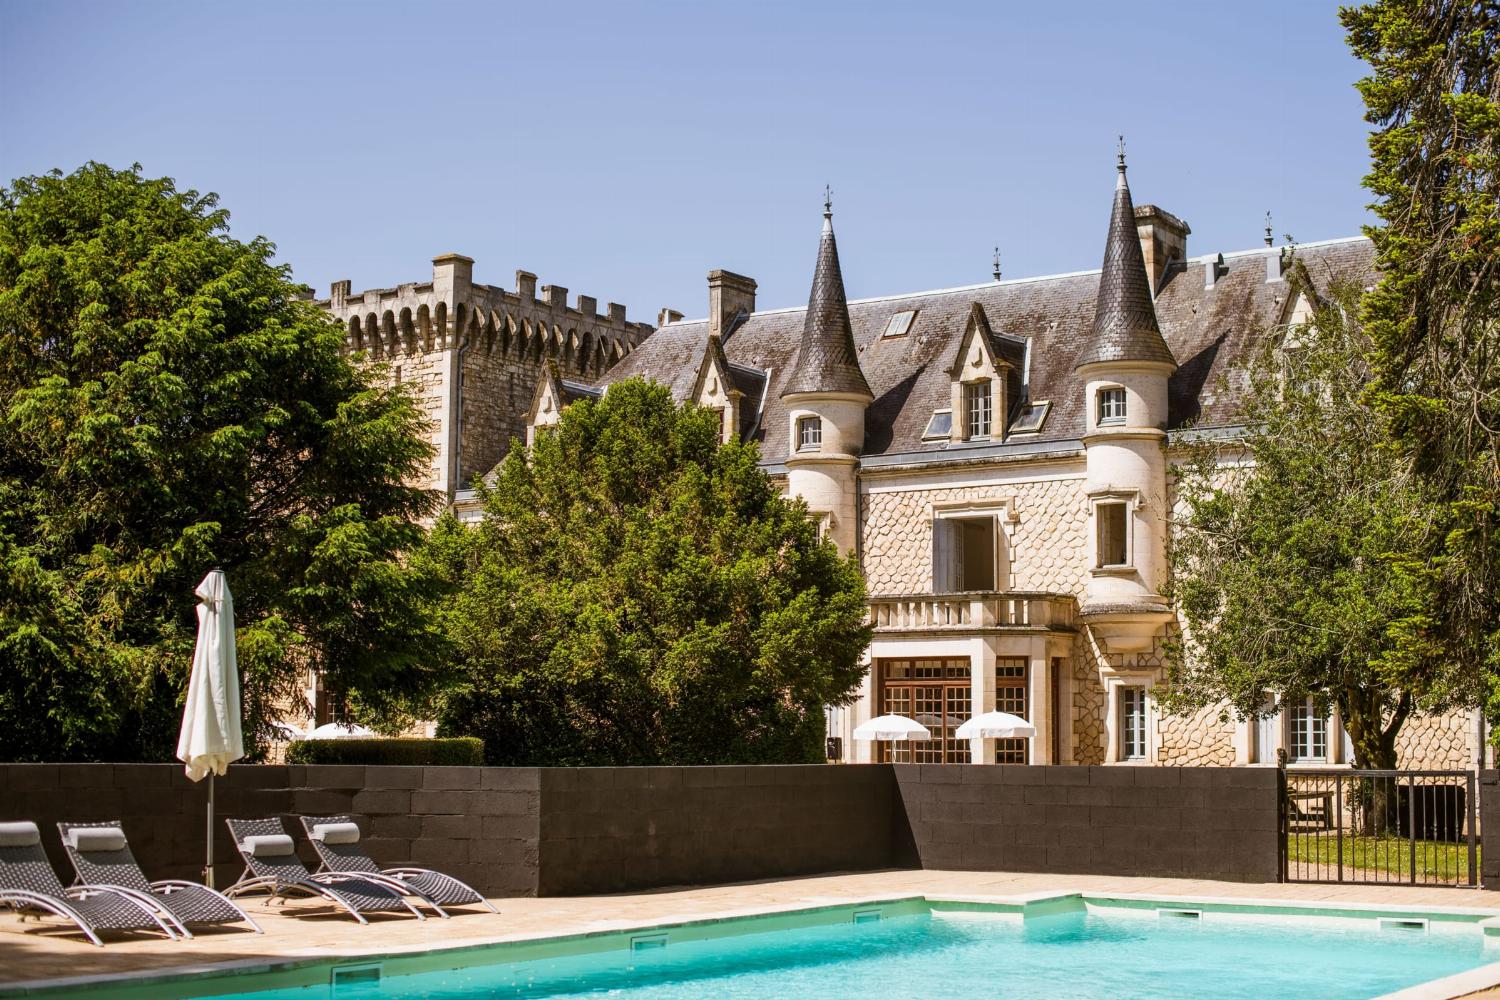 Vacation château in Charente with private heated pool